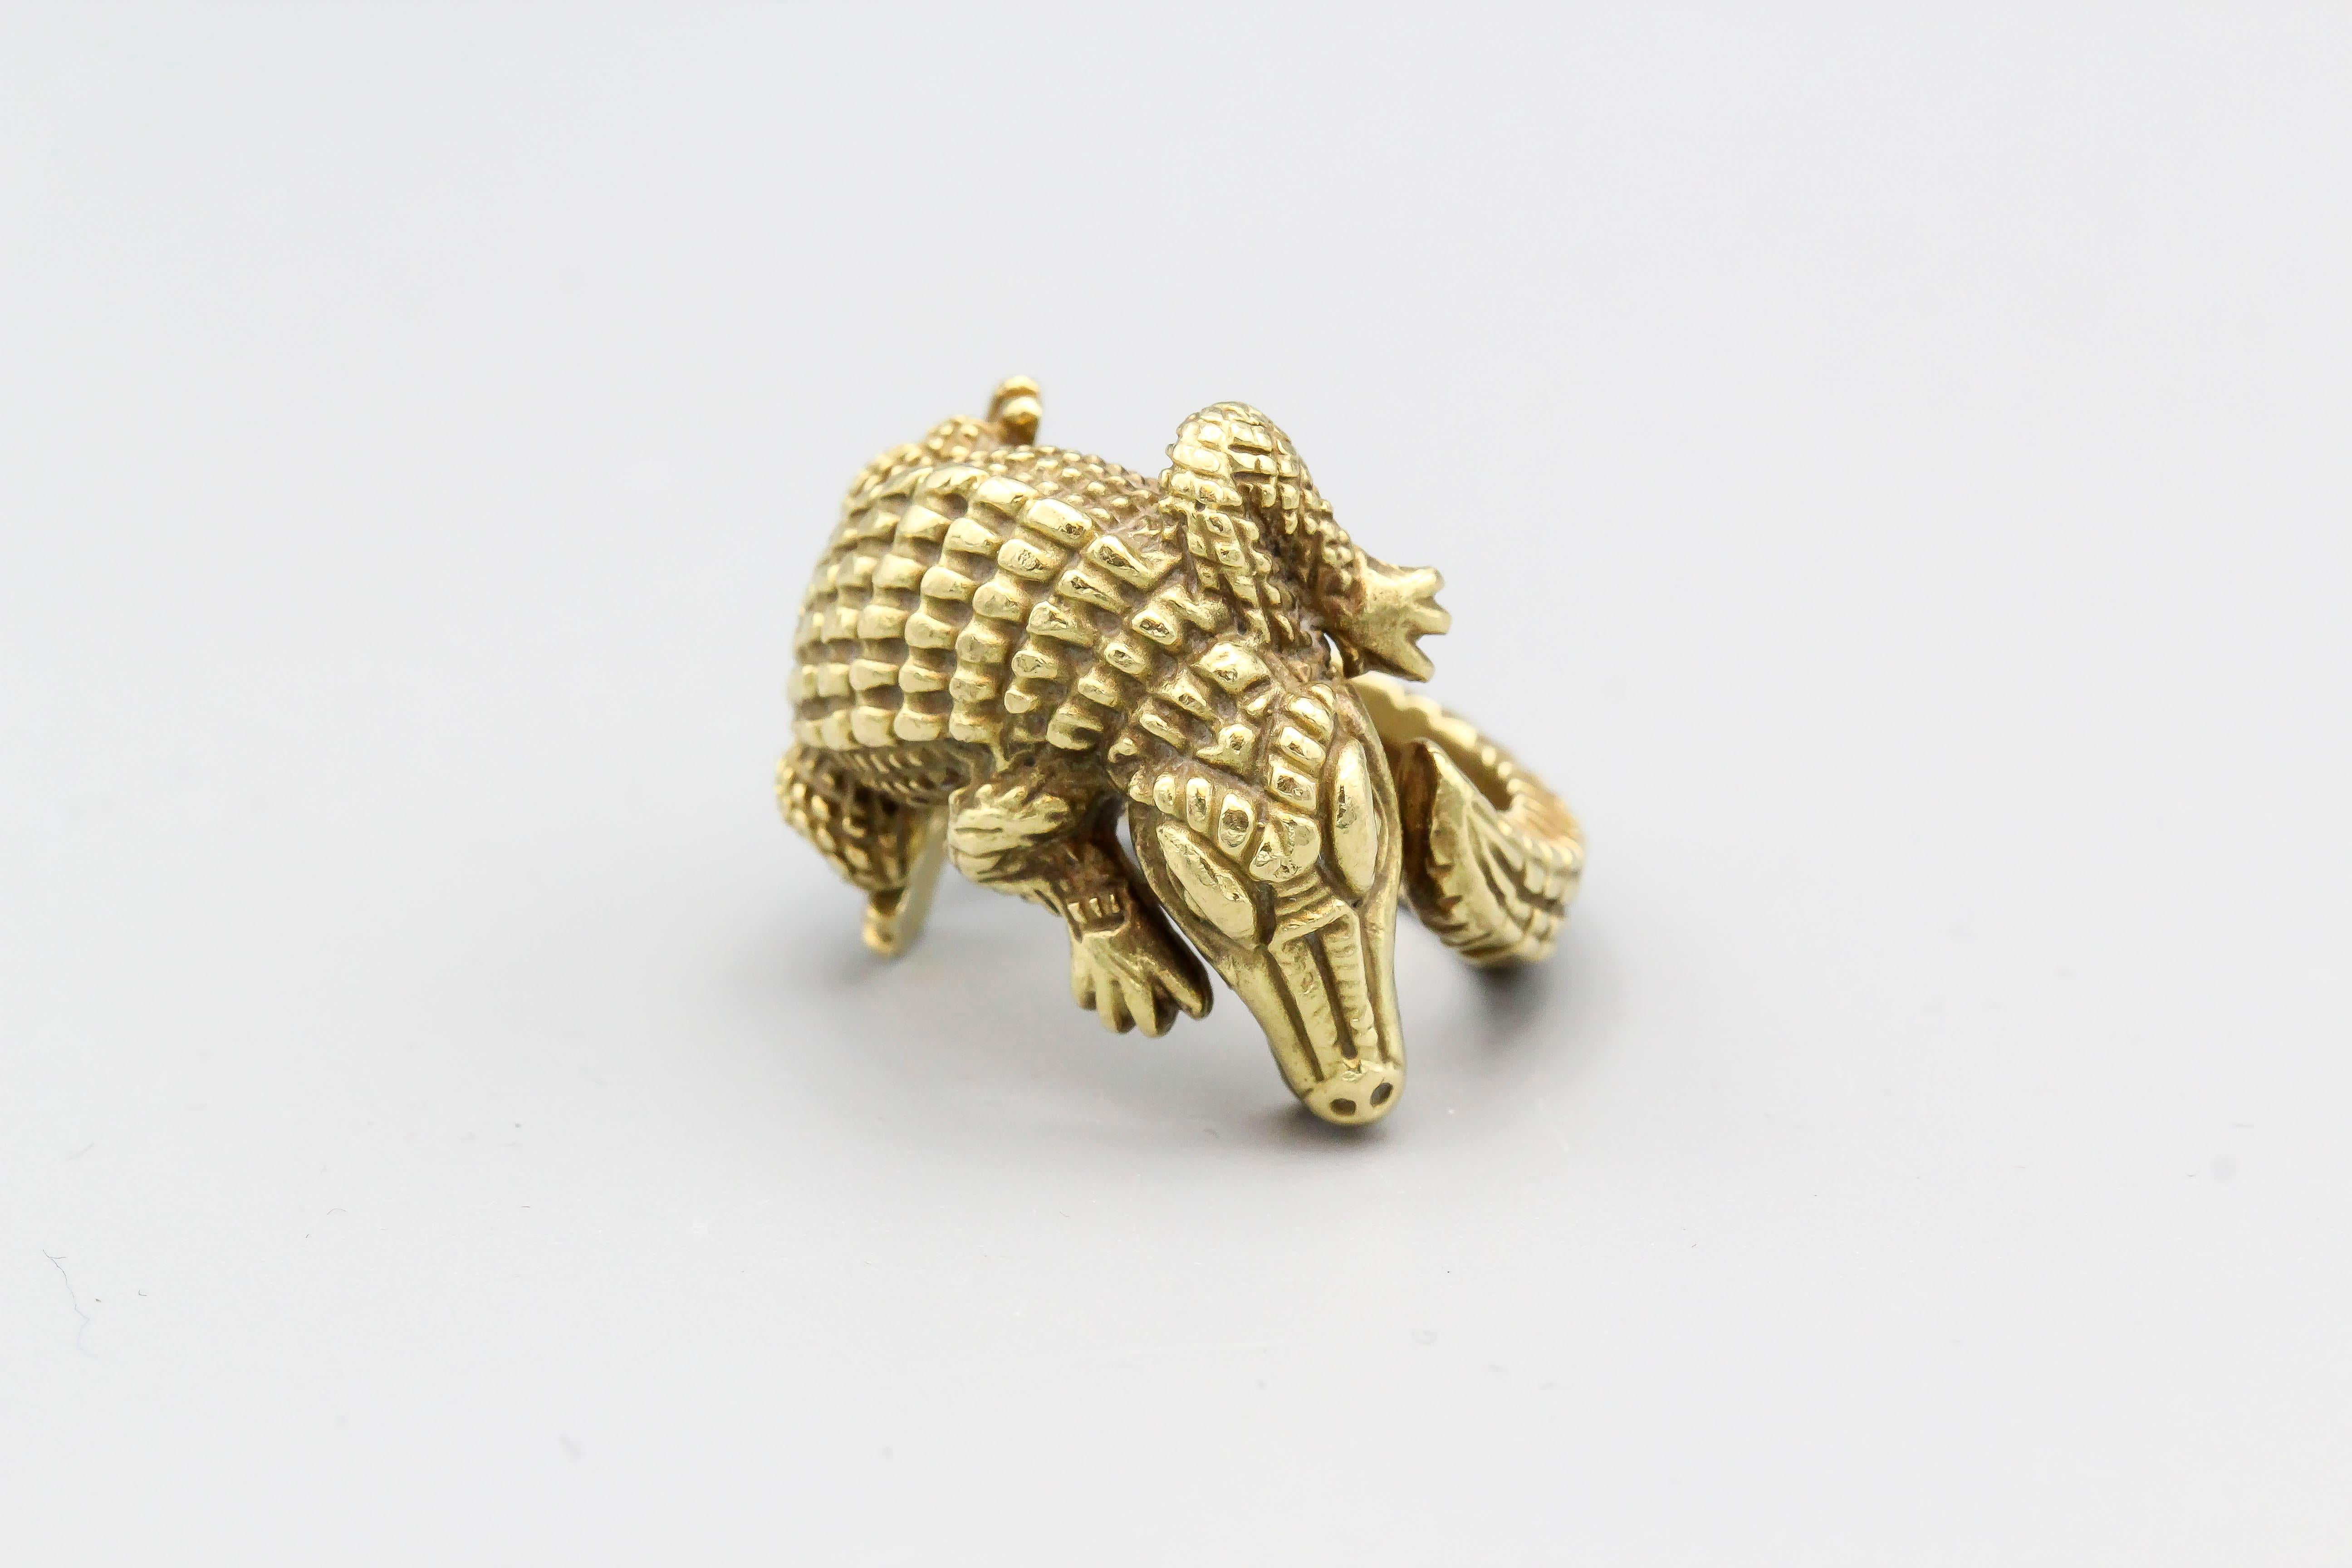 Fine 18K gold alligator ring by Kieselstein-Cord, circa 1988. Designed as an alligator wrapping head to tail around the finger, this whimsical ring offer fine detail and arguably Kieselstein's most famed animal motif.  Currently a size 5, but could